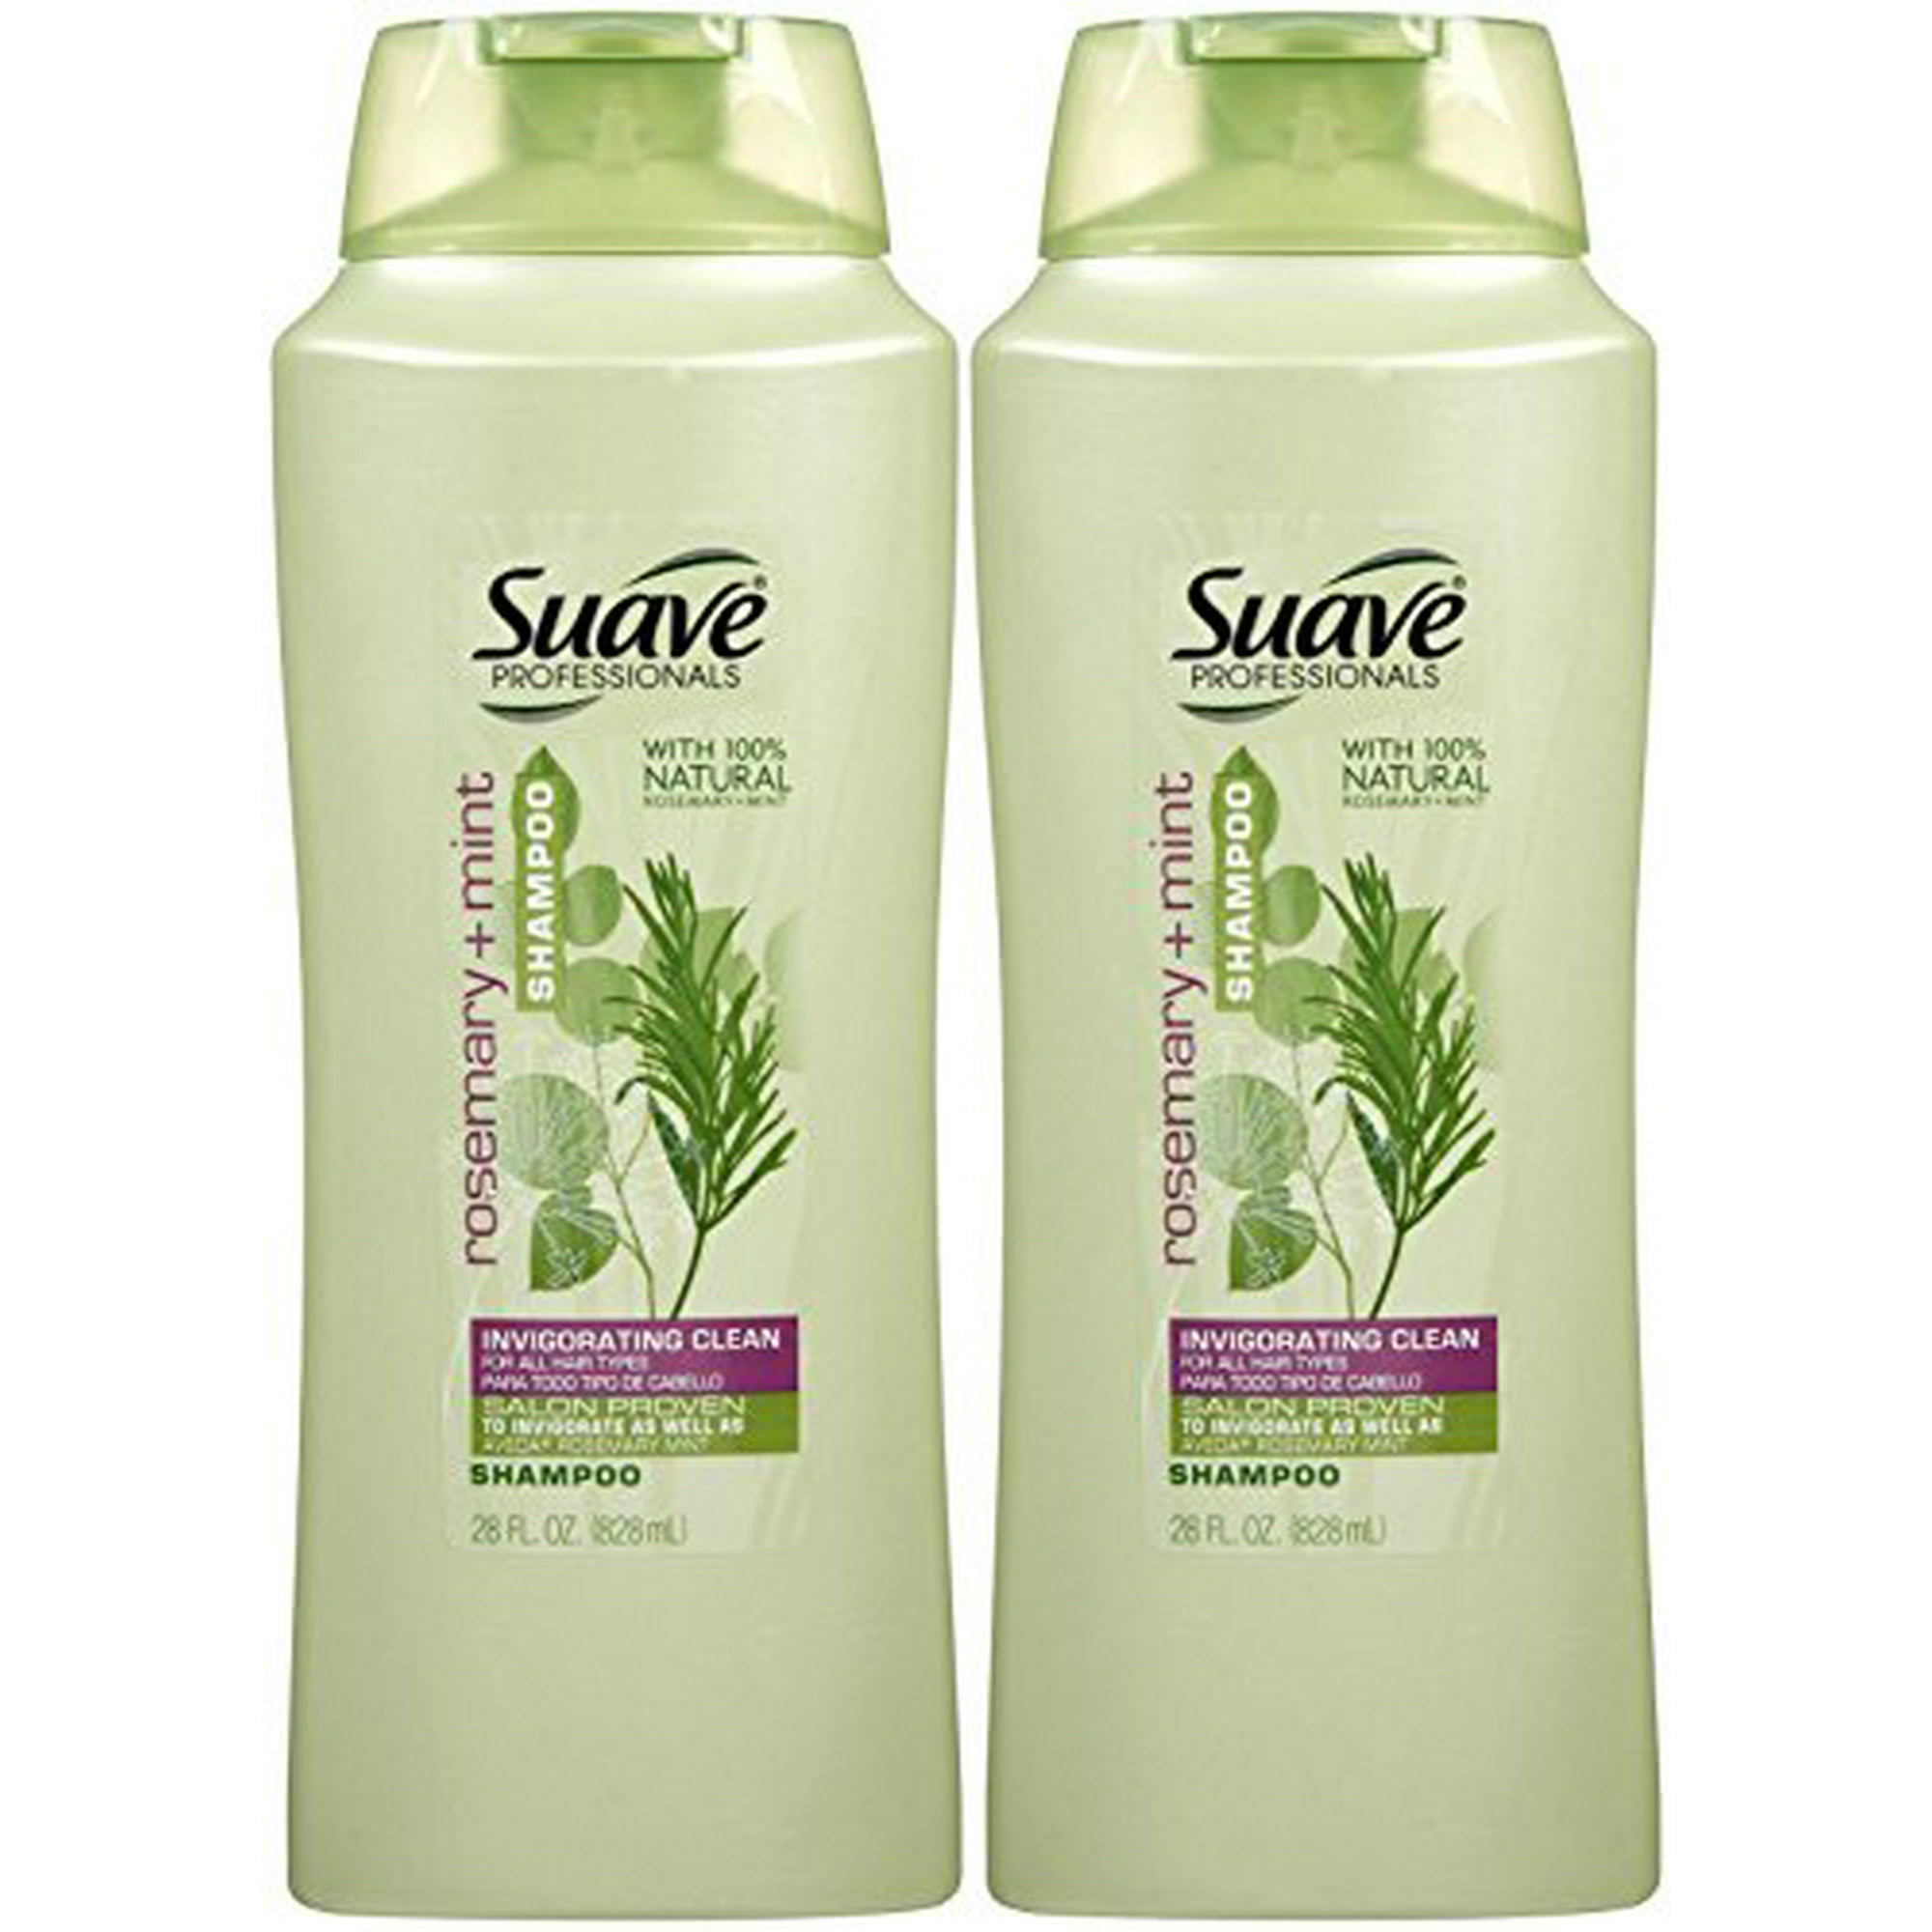 Professionals Shampoo - Rosemary and Mint oz - 2 Pack | Walmart Canada